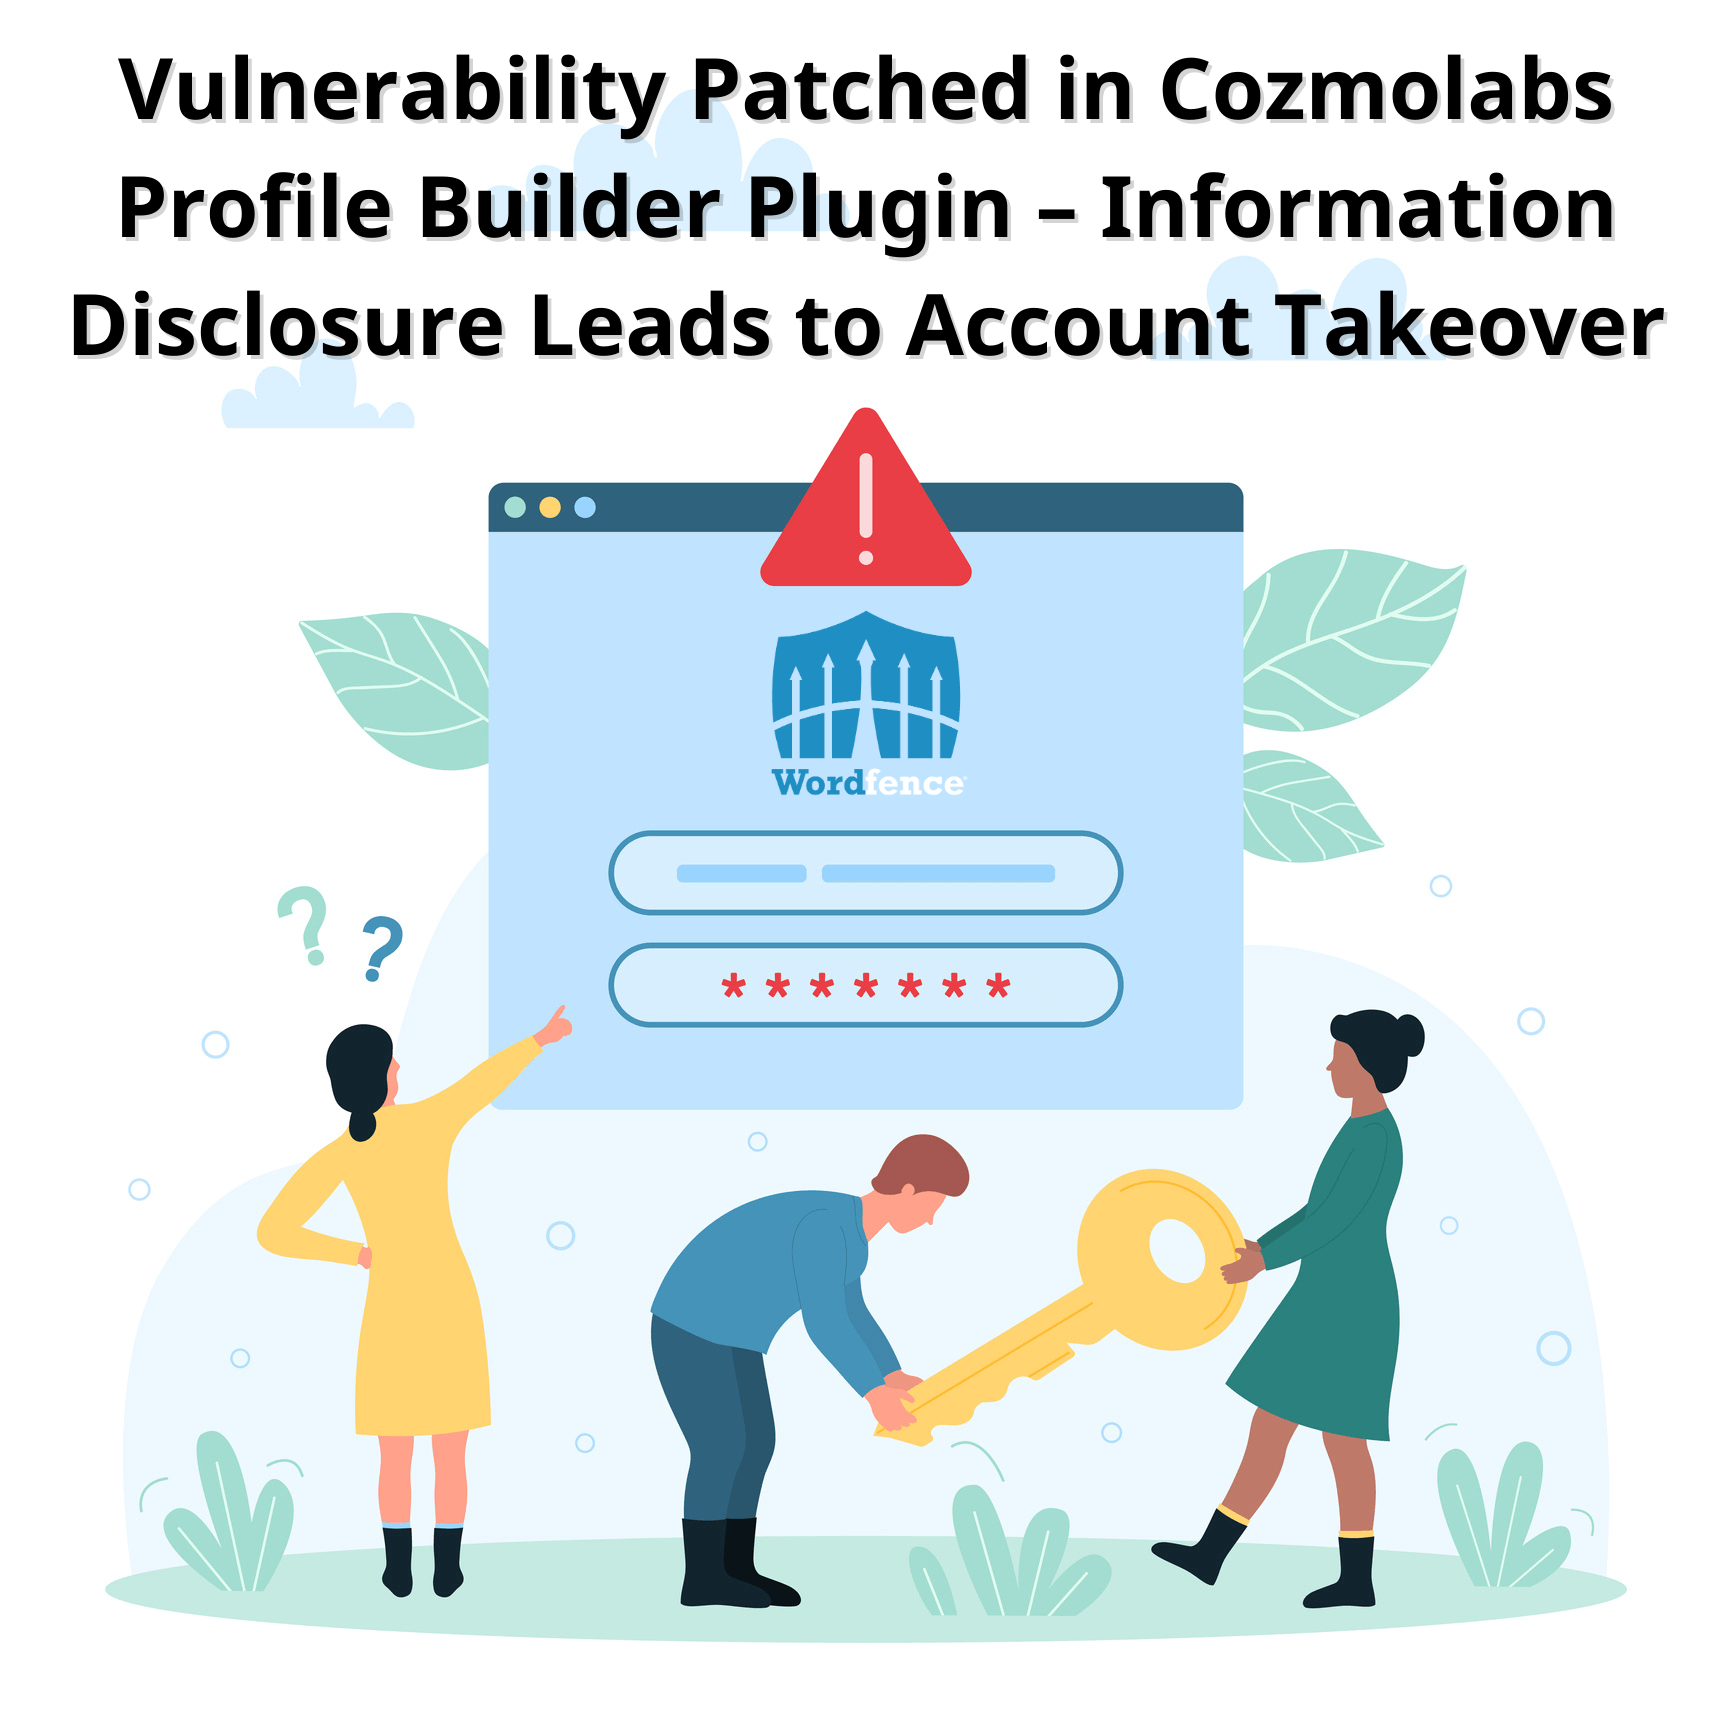 Leading Image - Vulnerability Patched in Cozmolabs Profile Builder Plugin - Information Disclosure Leads to Account Takevoer